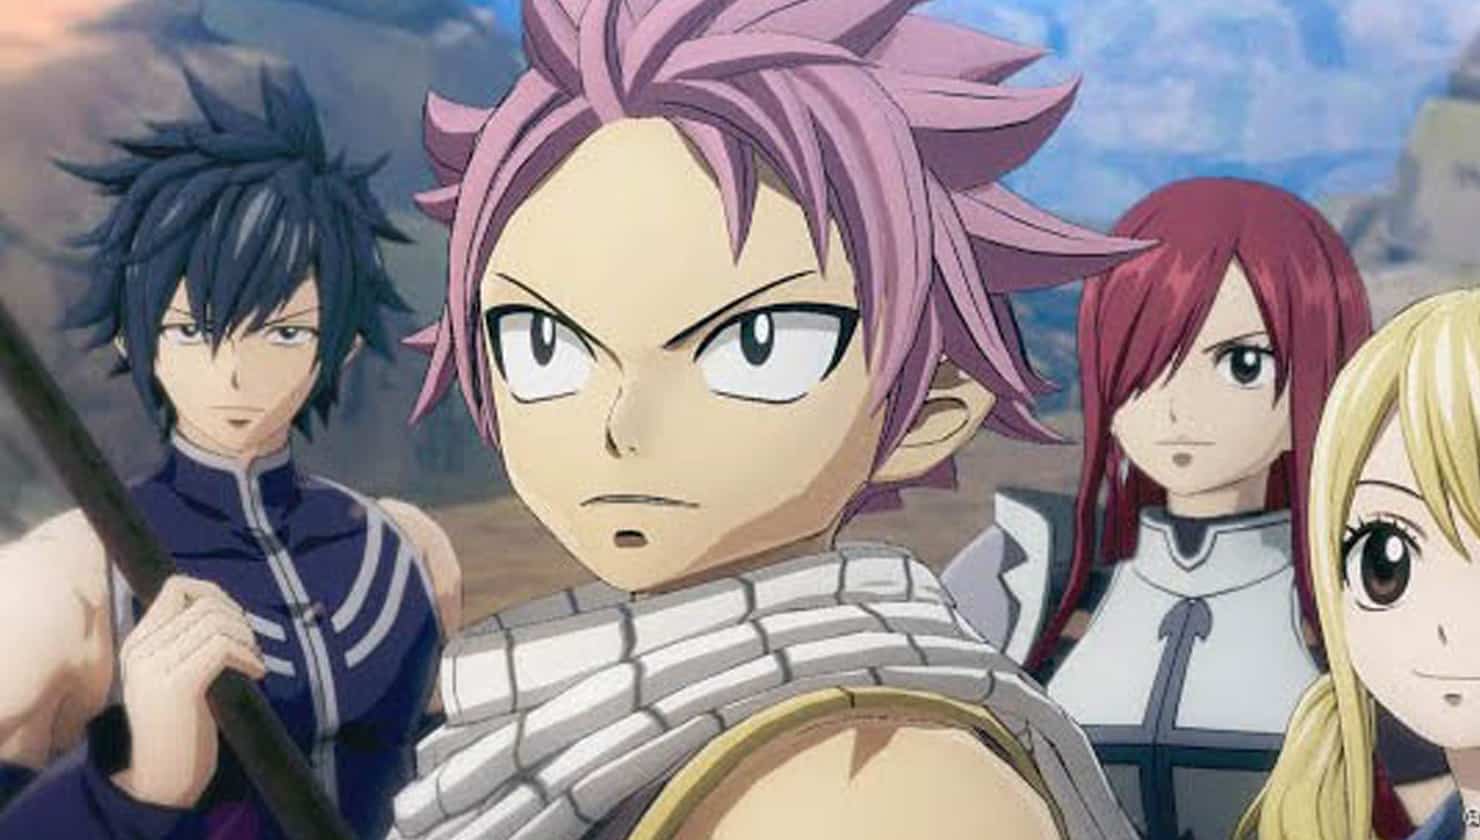 100% Fun Fairy Tail Quiz. Which Fairy Tail Character Are You?